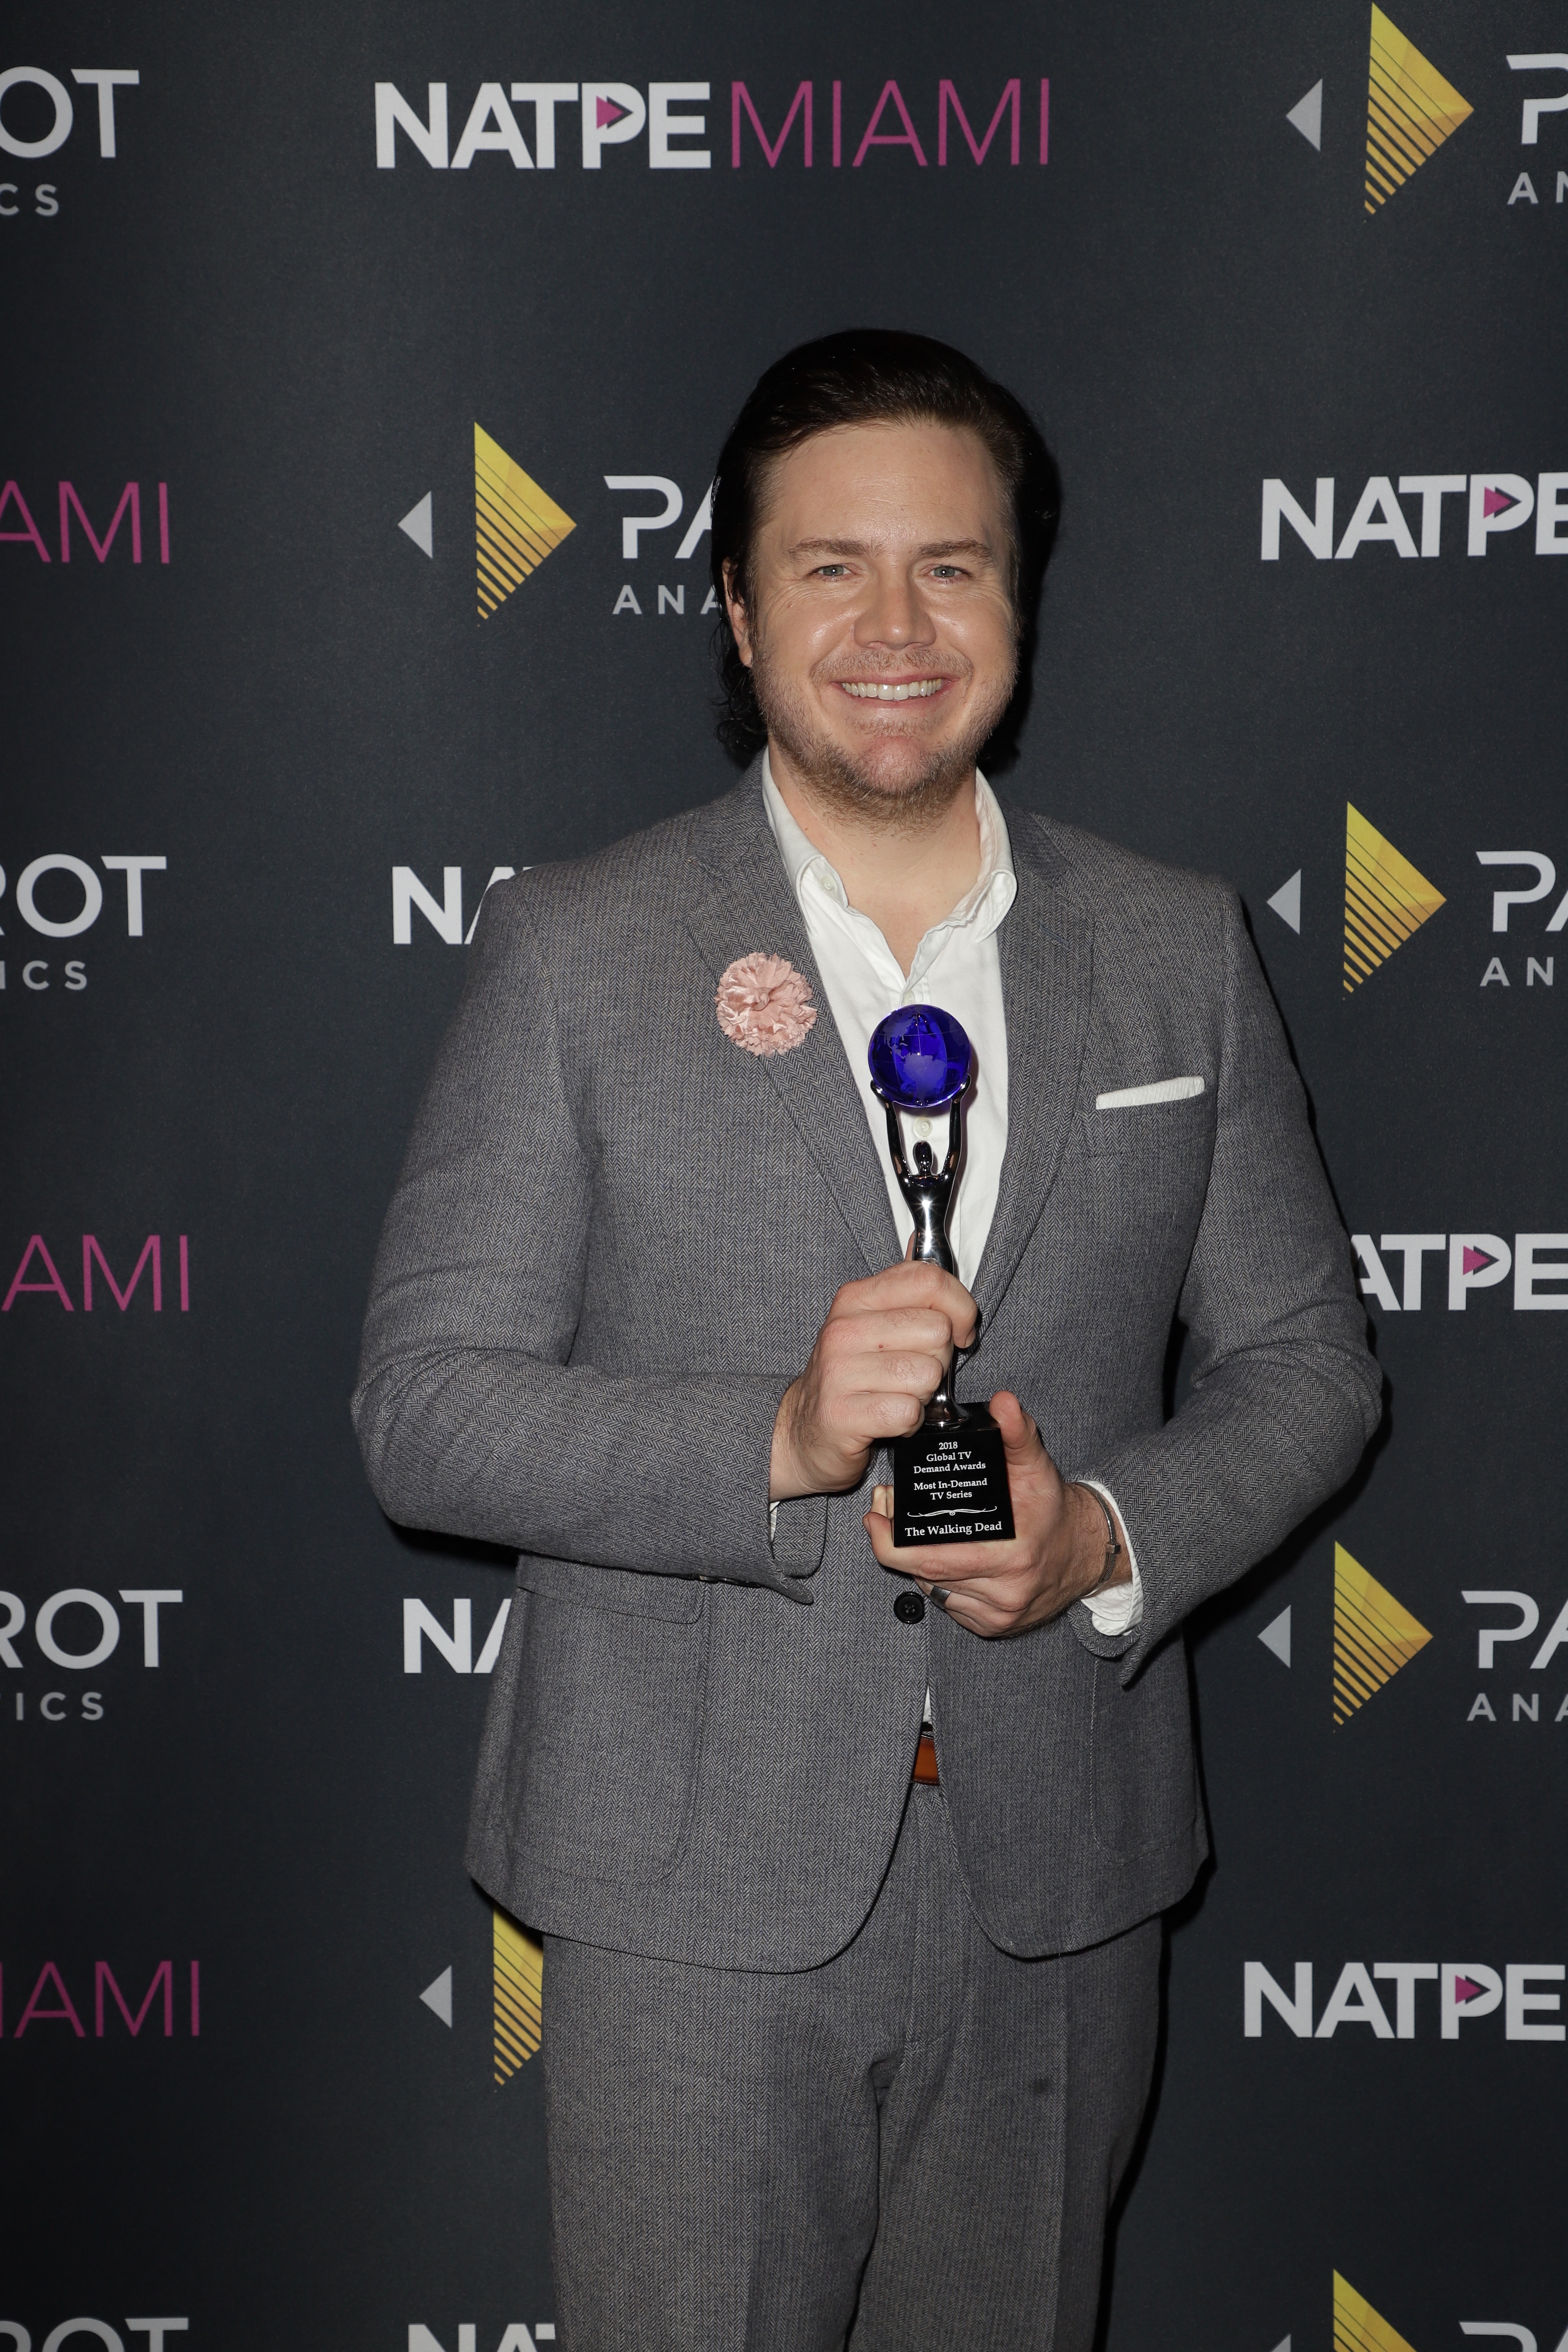 The Walking Dead actor Josh McDermitt at the Global TV Demand Awards. (Photo by John Parra/Getty Images for Parrot Analytics)